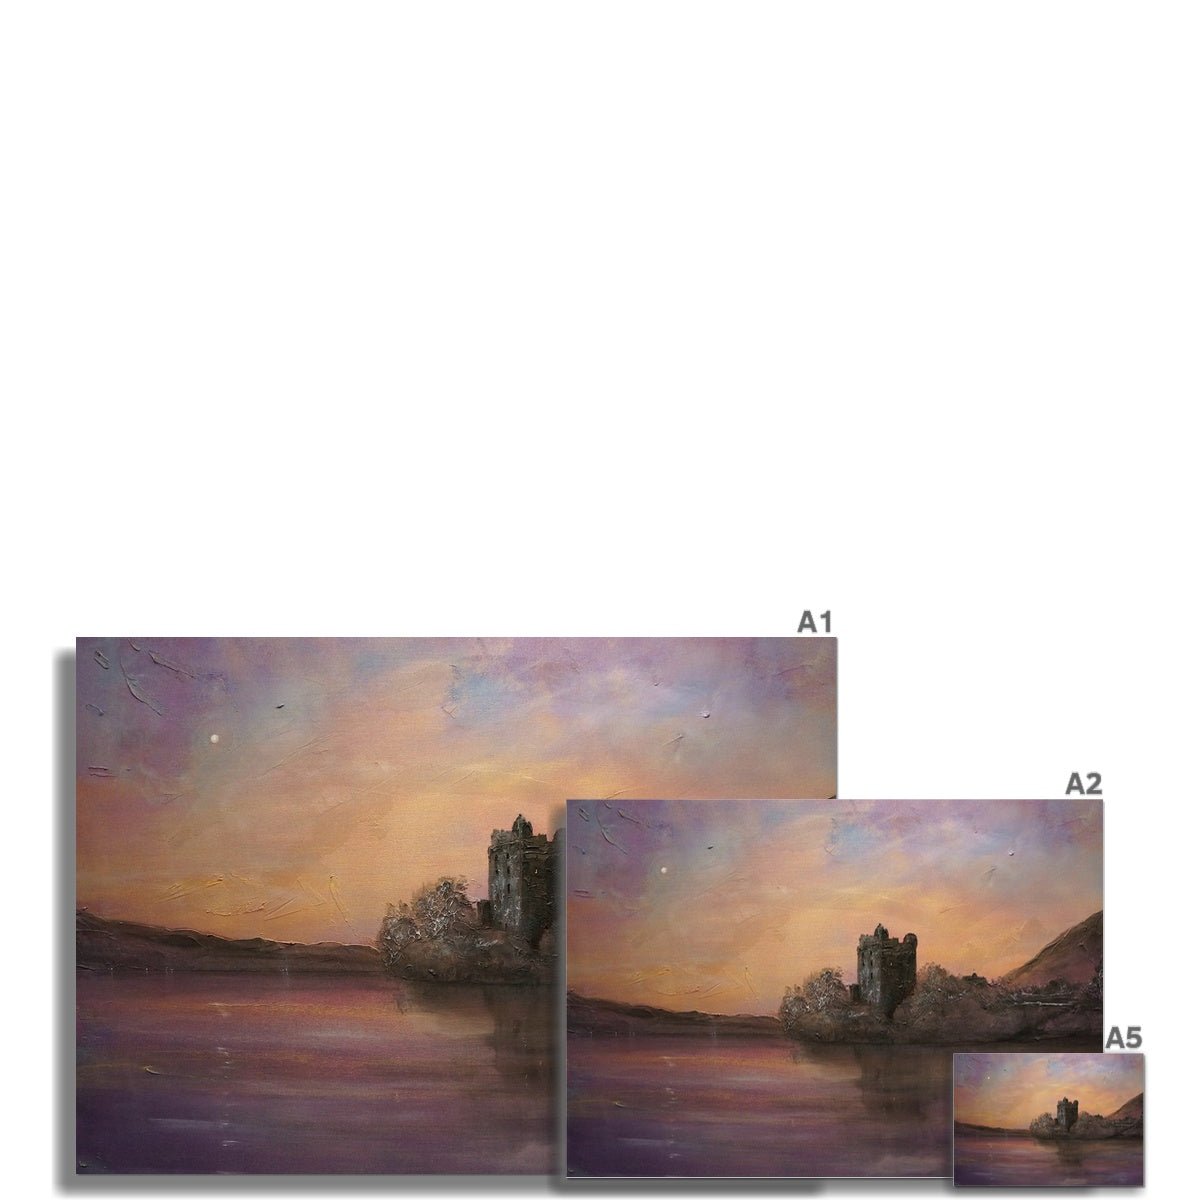 Urquhart Castle Moonlight Painting | Fine Art Prints From Scotland-Unframed Prints-Historic & Iconic Scotland Art Gallery-Paintings, Prints, Homeware, Art Gifts From Scotland By Scottish Artist Kevin Hunter